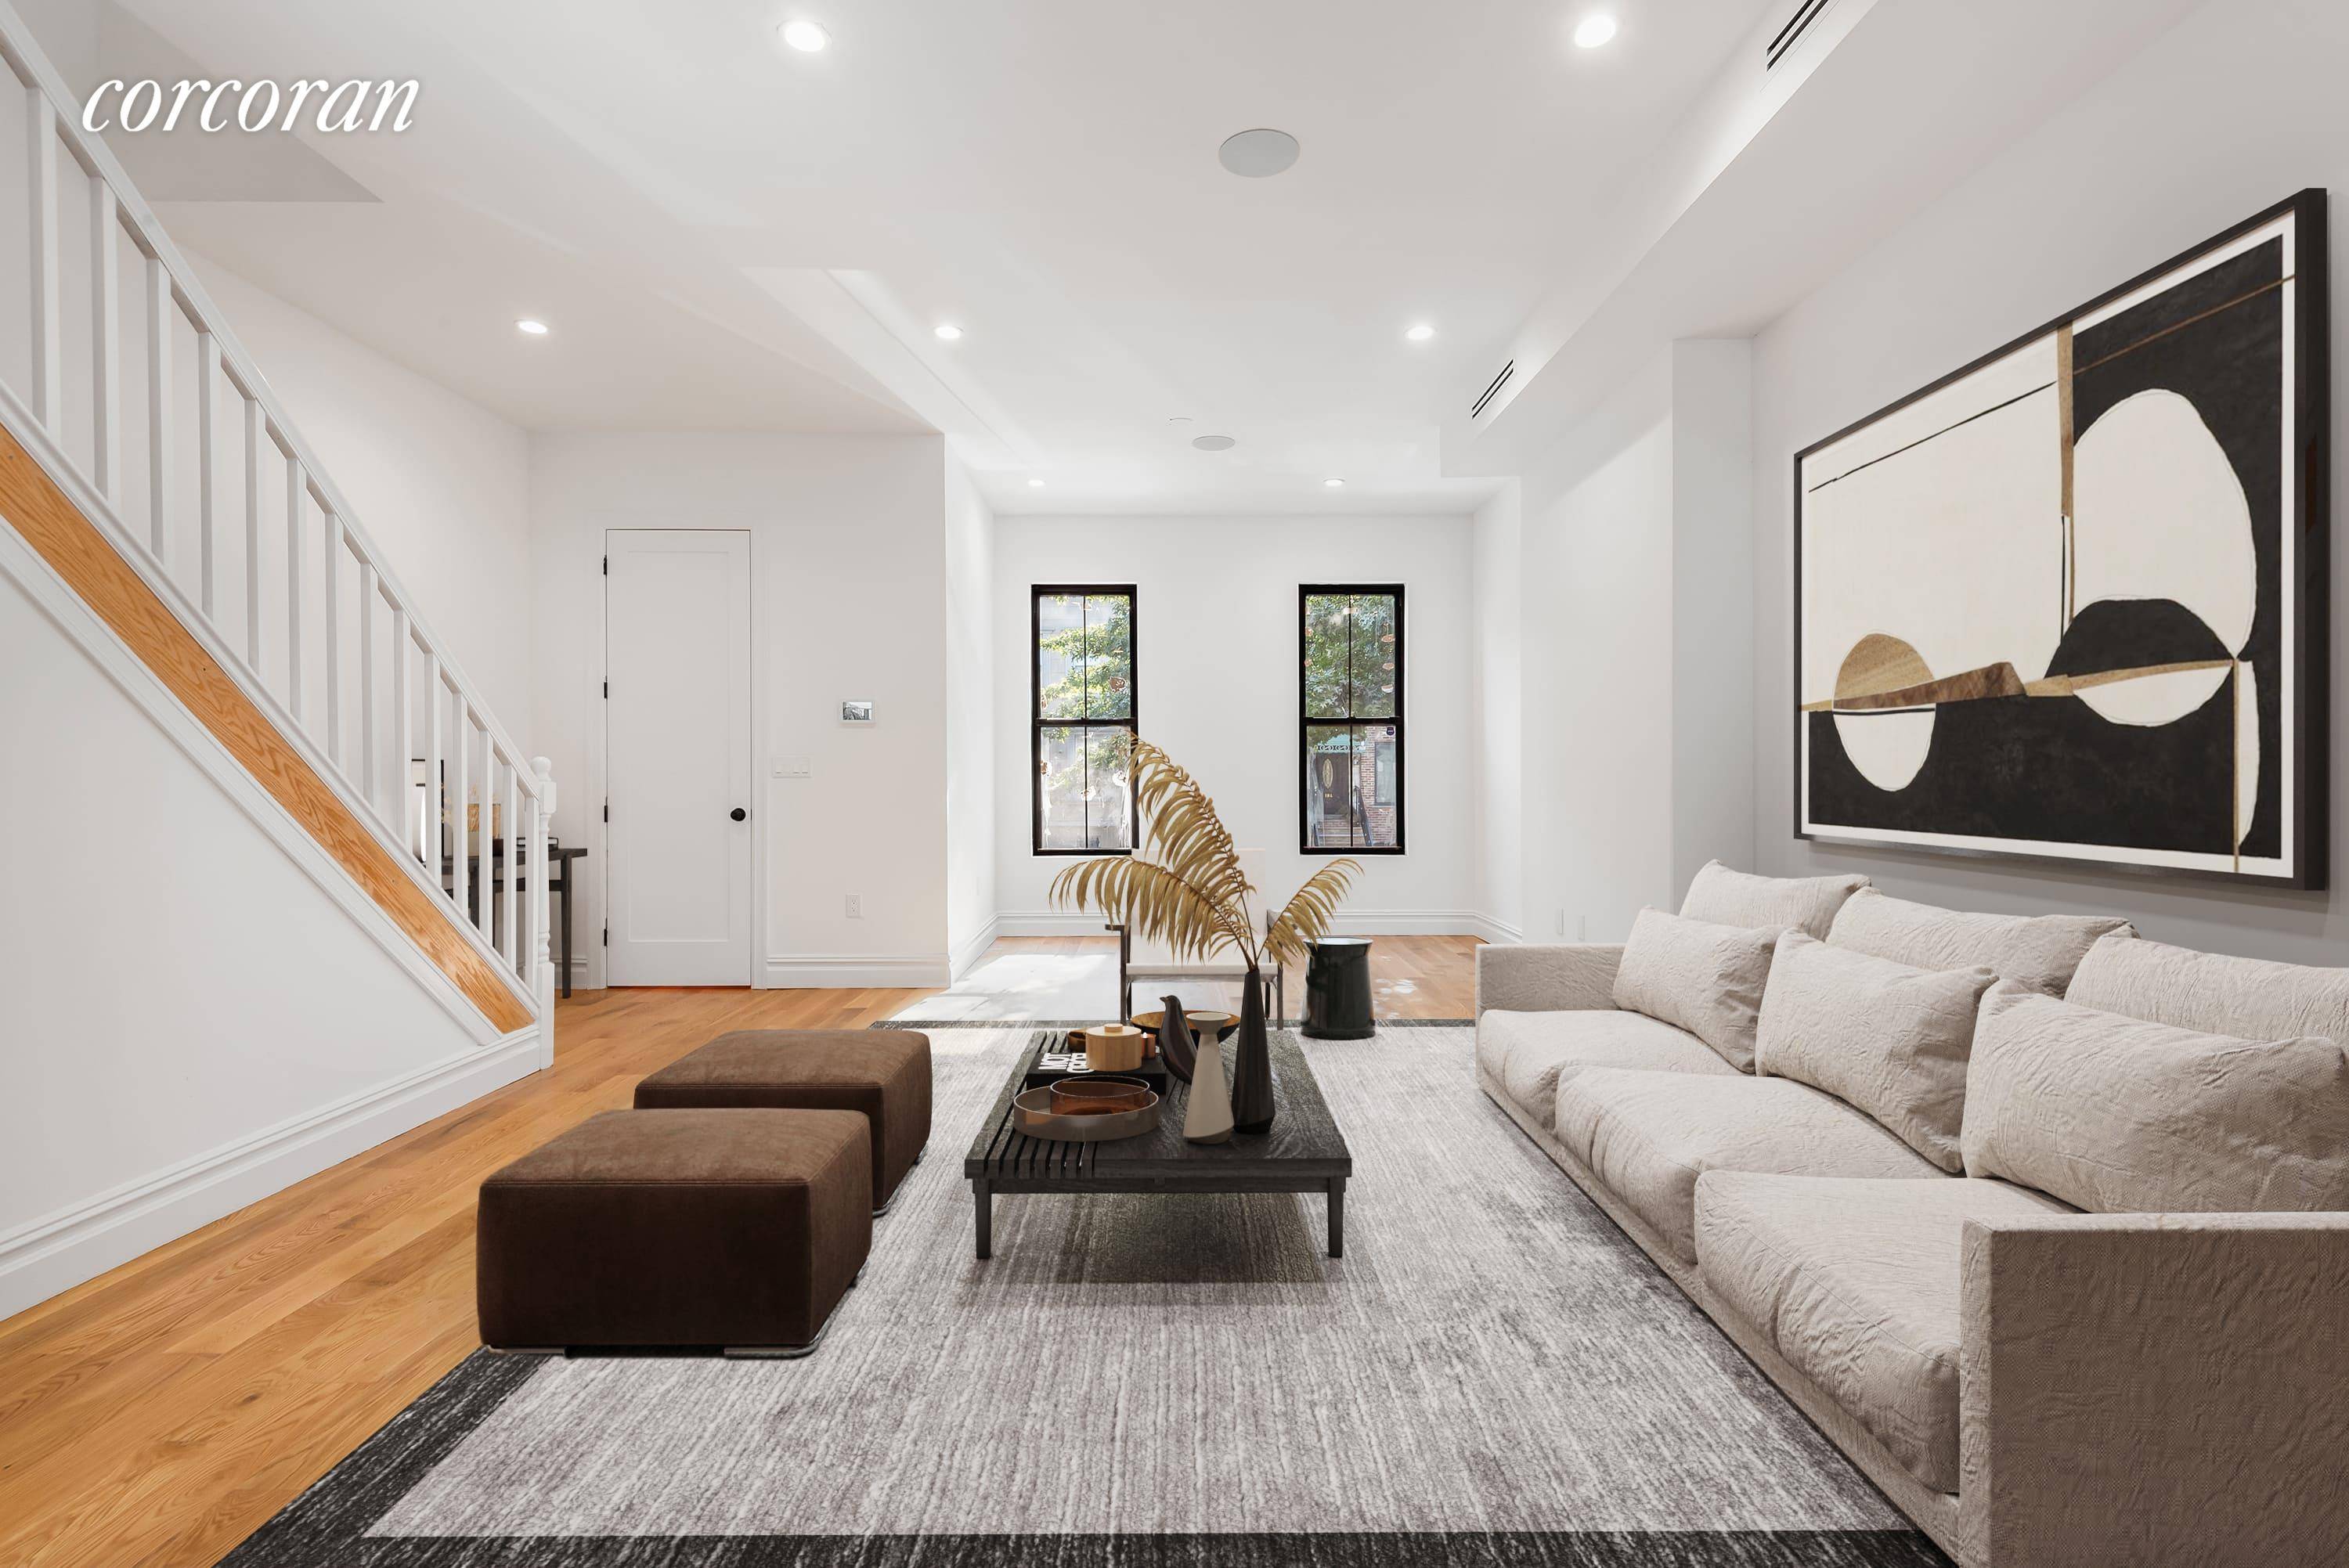 Welcome to 193 Cornelia Street, a beautiful, 2, 565 sq ft, two family townhouse, situated in the heart of burgeoning Bushwick !